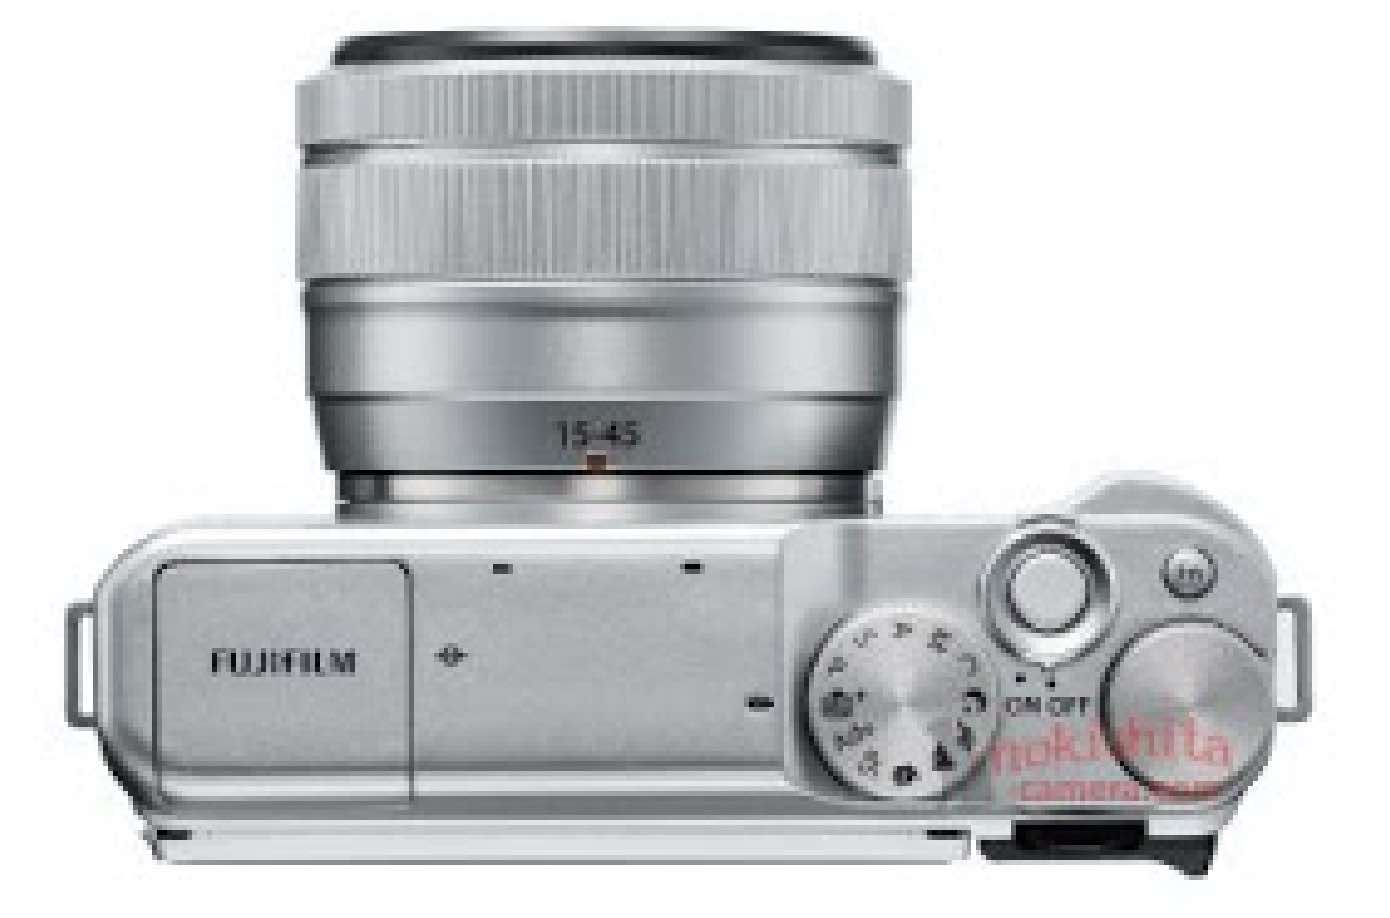 New Images of Fujinon XC 15-45 and Fujifilm X-A20 Leaked - UPDATE 